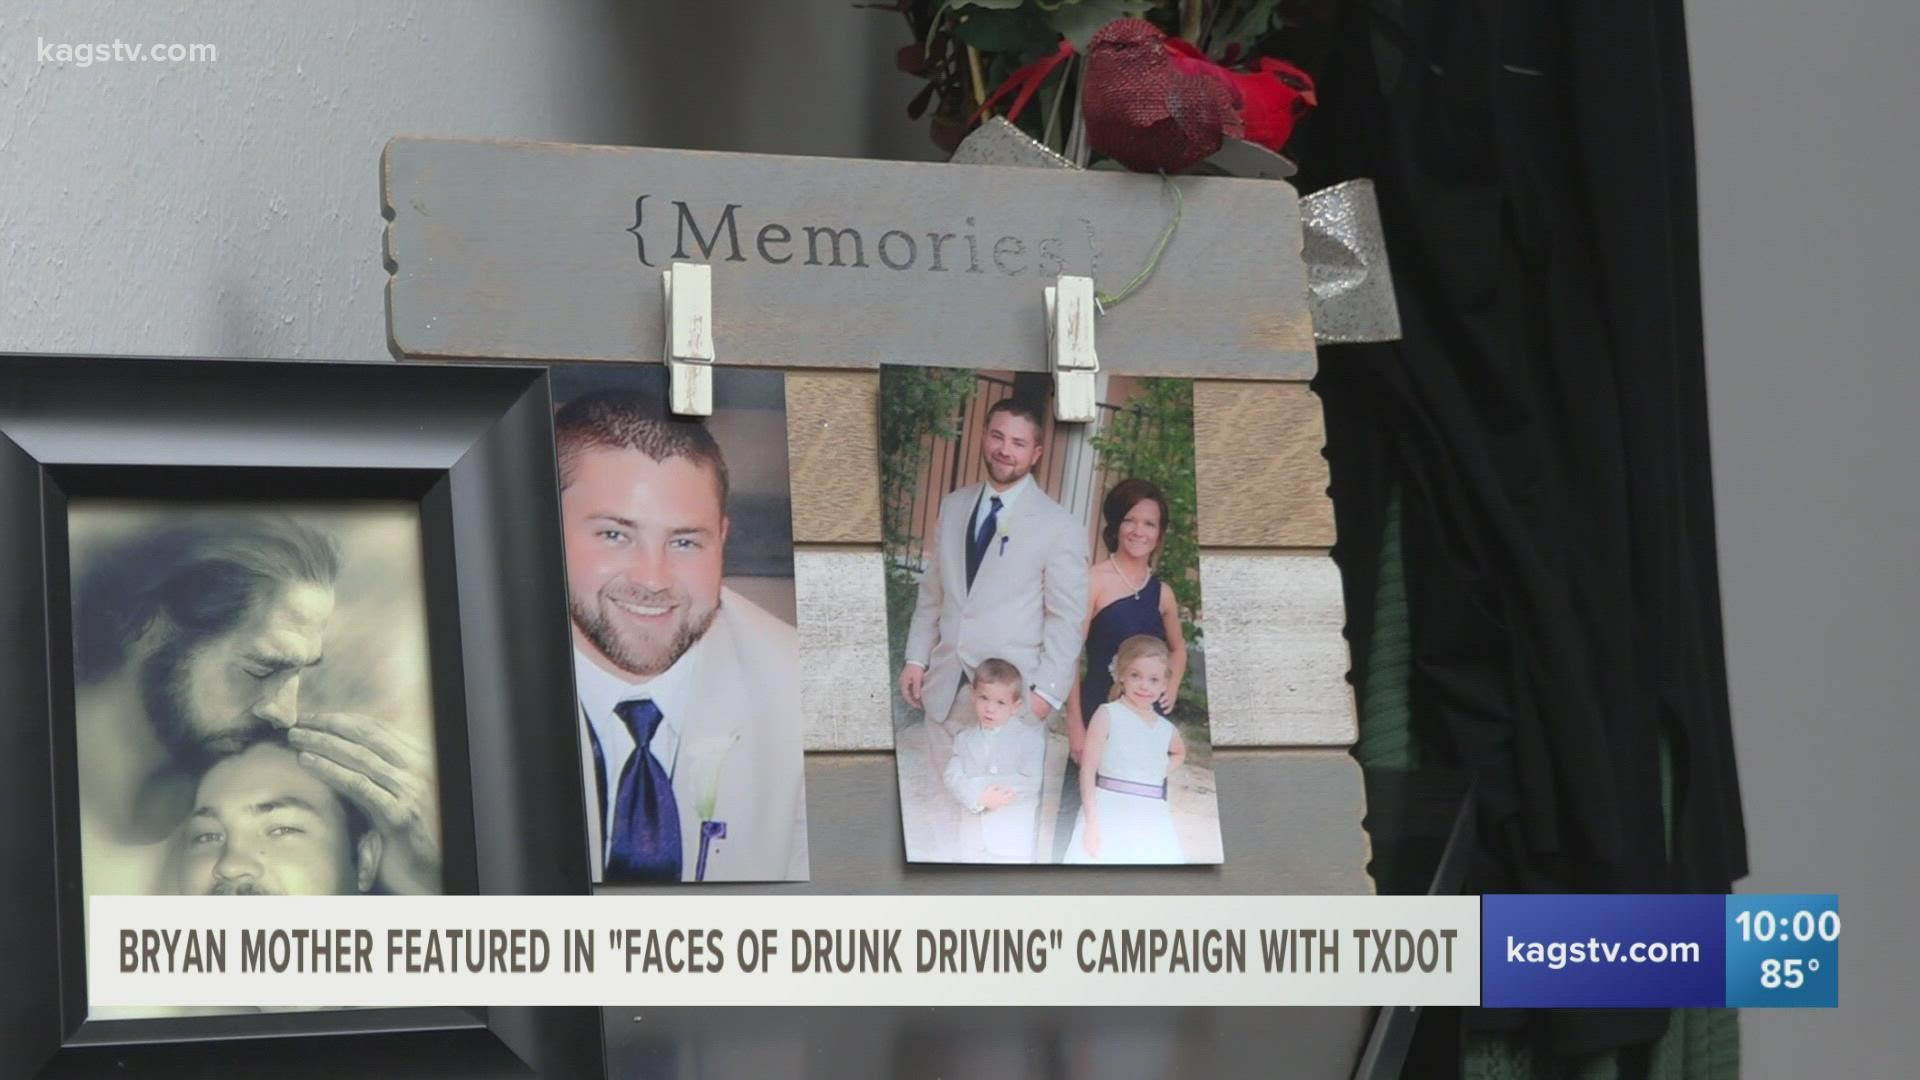 Pam Todaro lost her son in a drunk driving crash. Now, she's spreading a message to others so they don't have to go through the same tragedy.